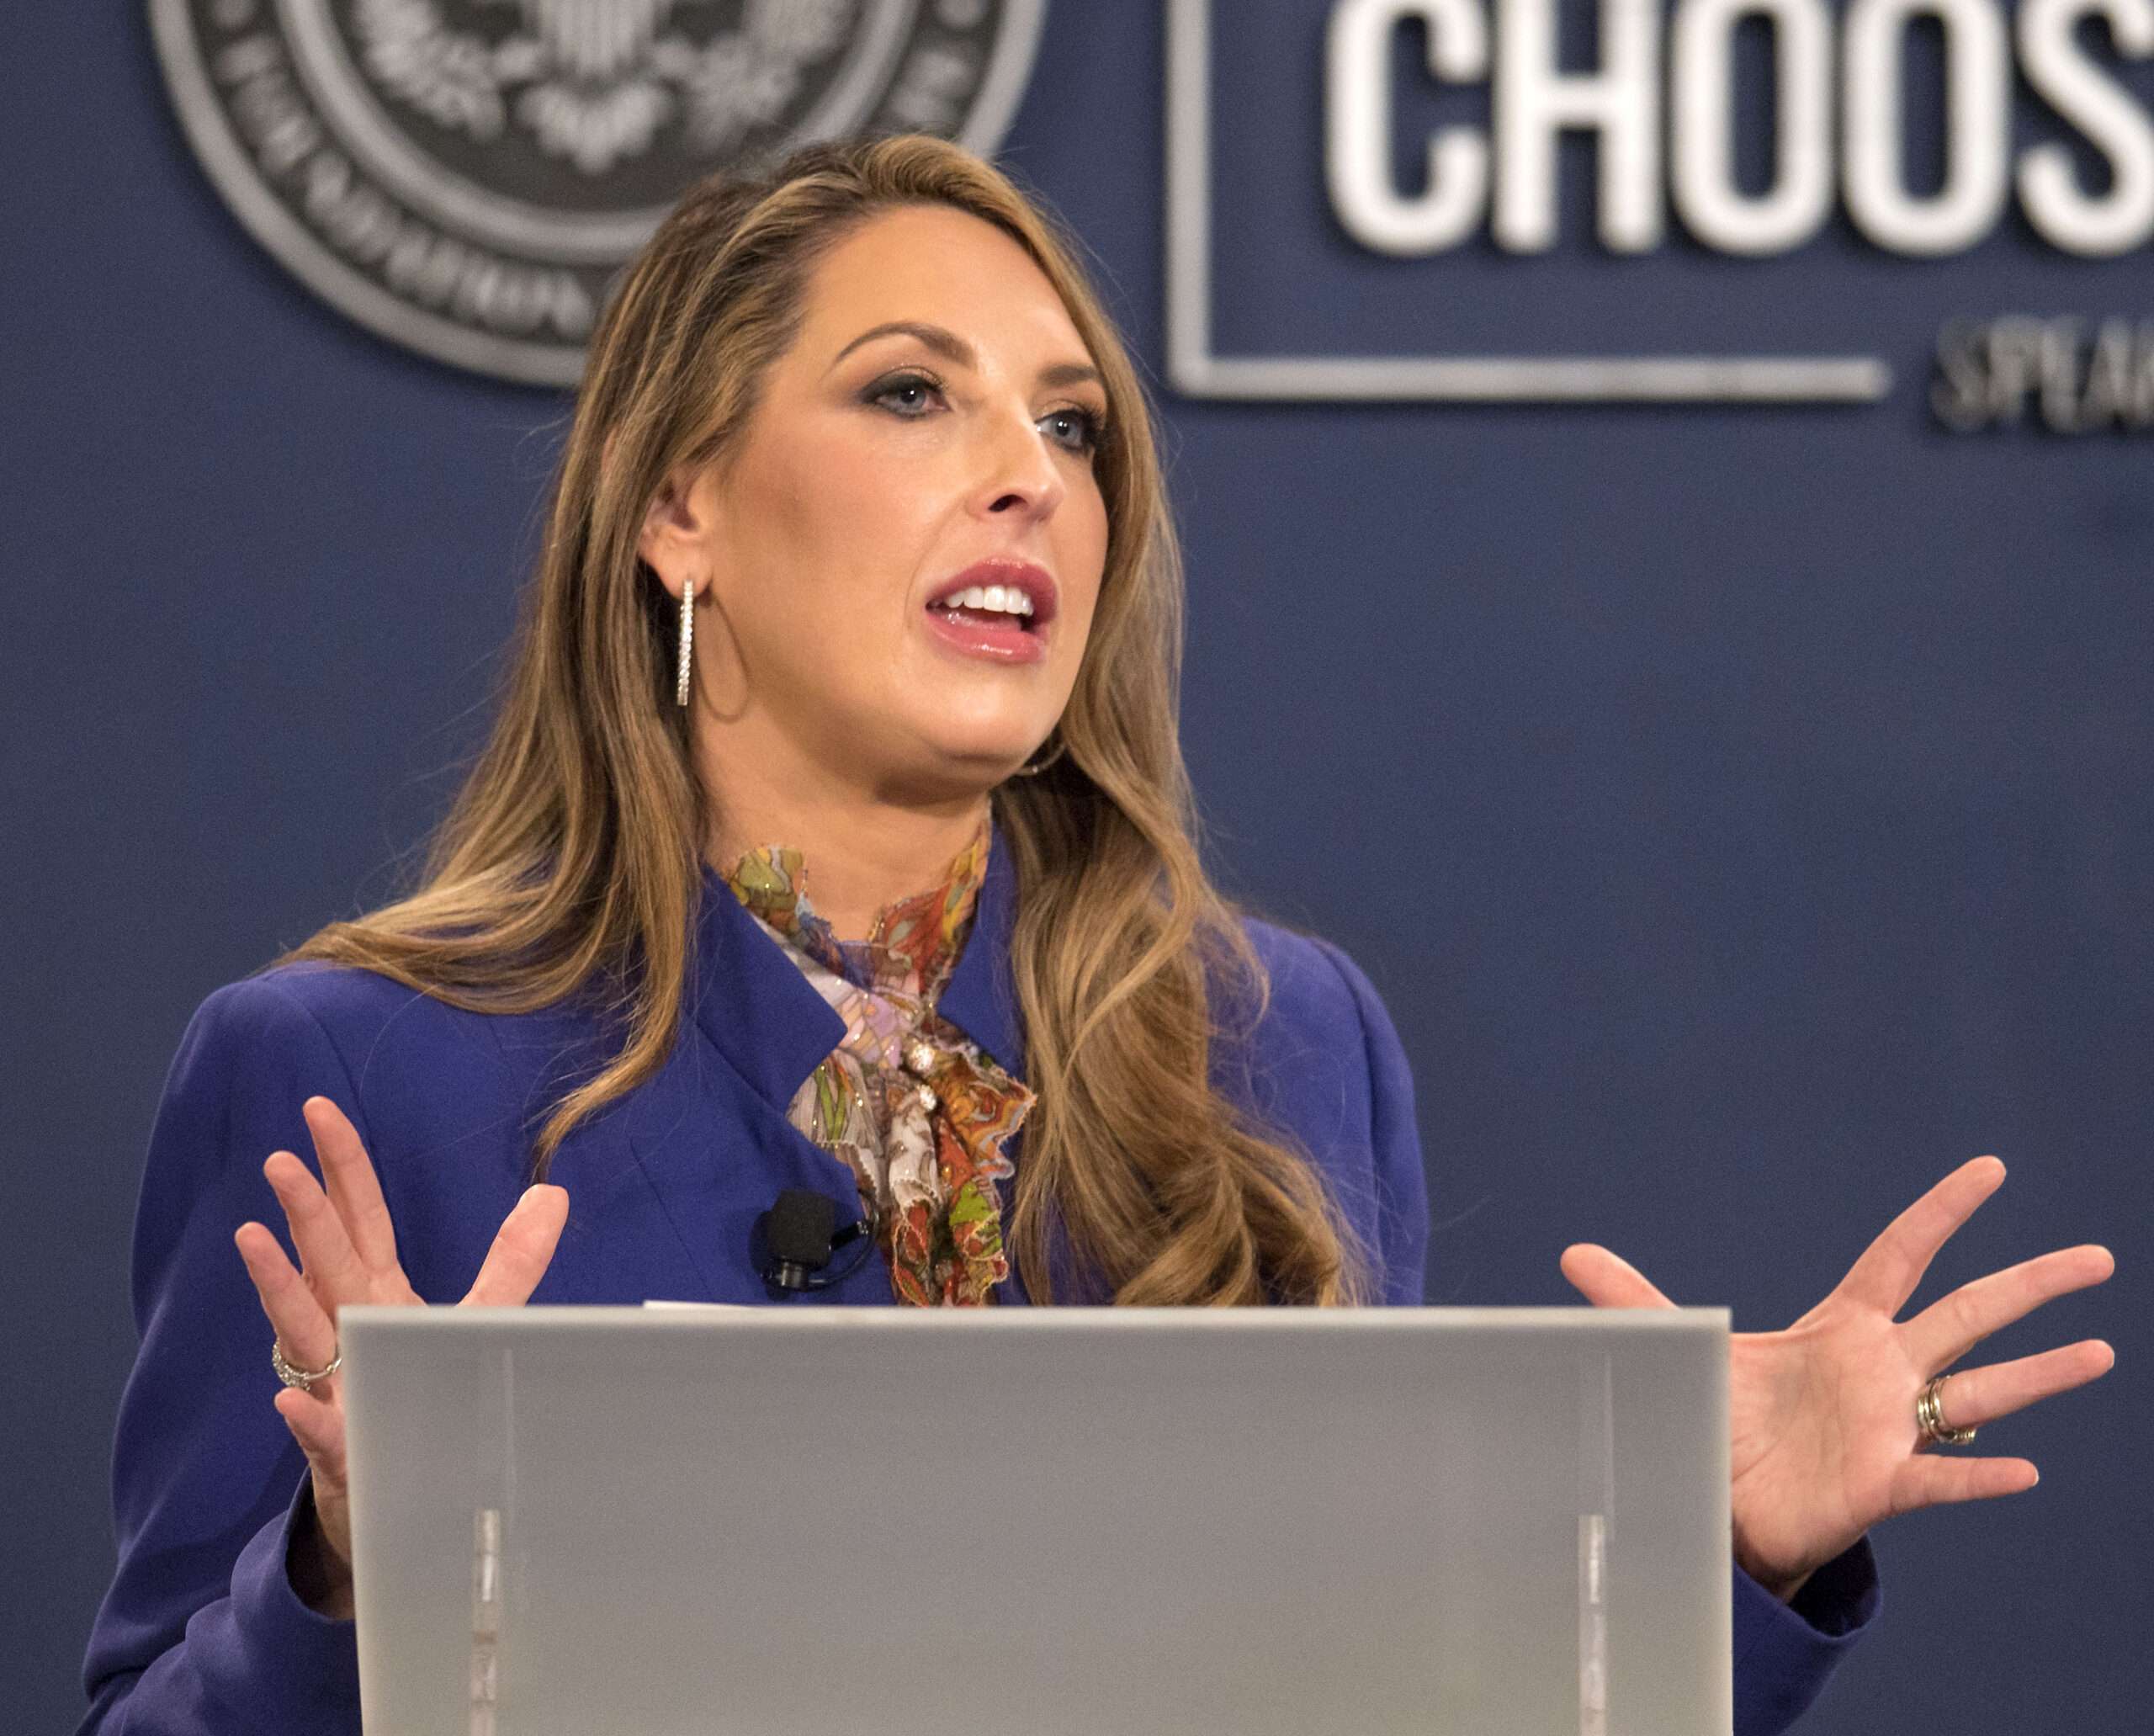 Ronna McDaniel and the media's election denial double standard